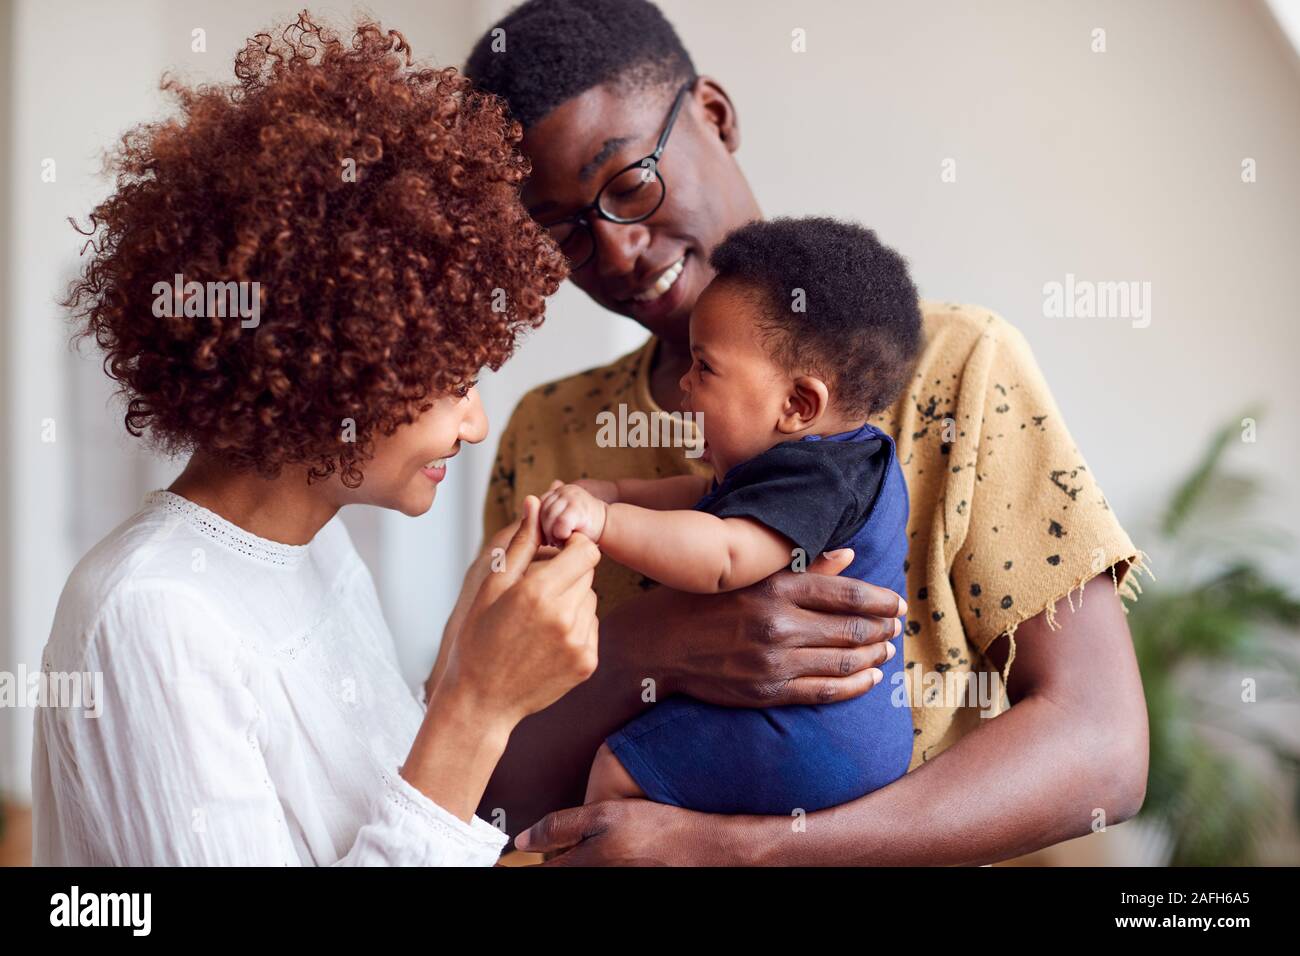 Loving Parents Playing With Newborn Baby At Home In Loft Apartment Stock Photo